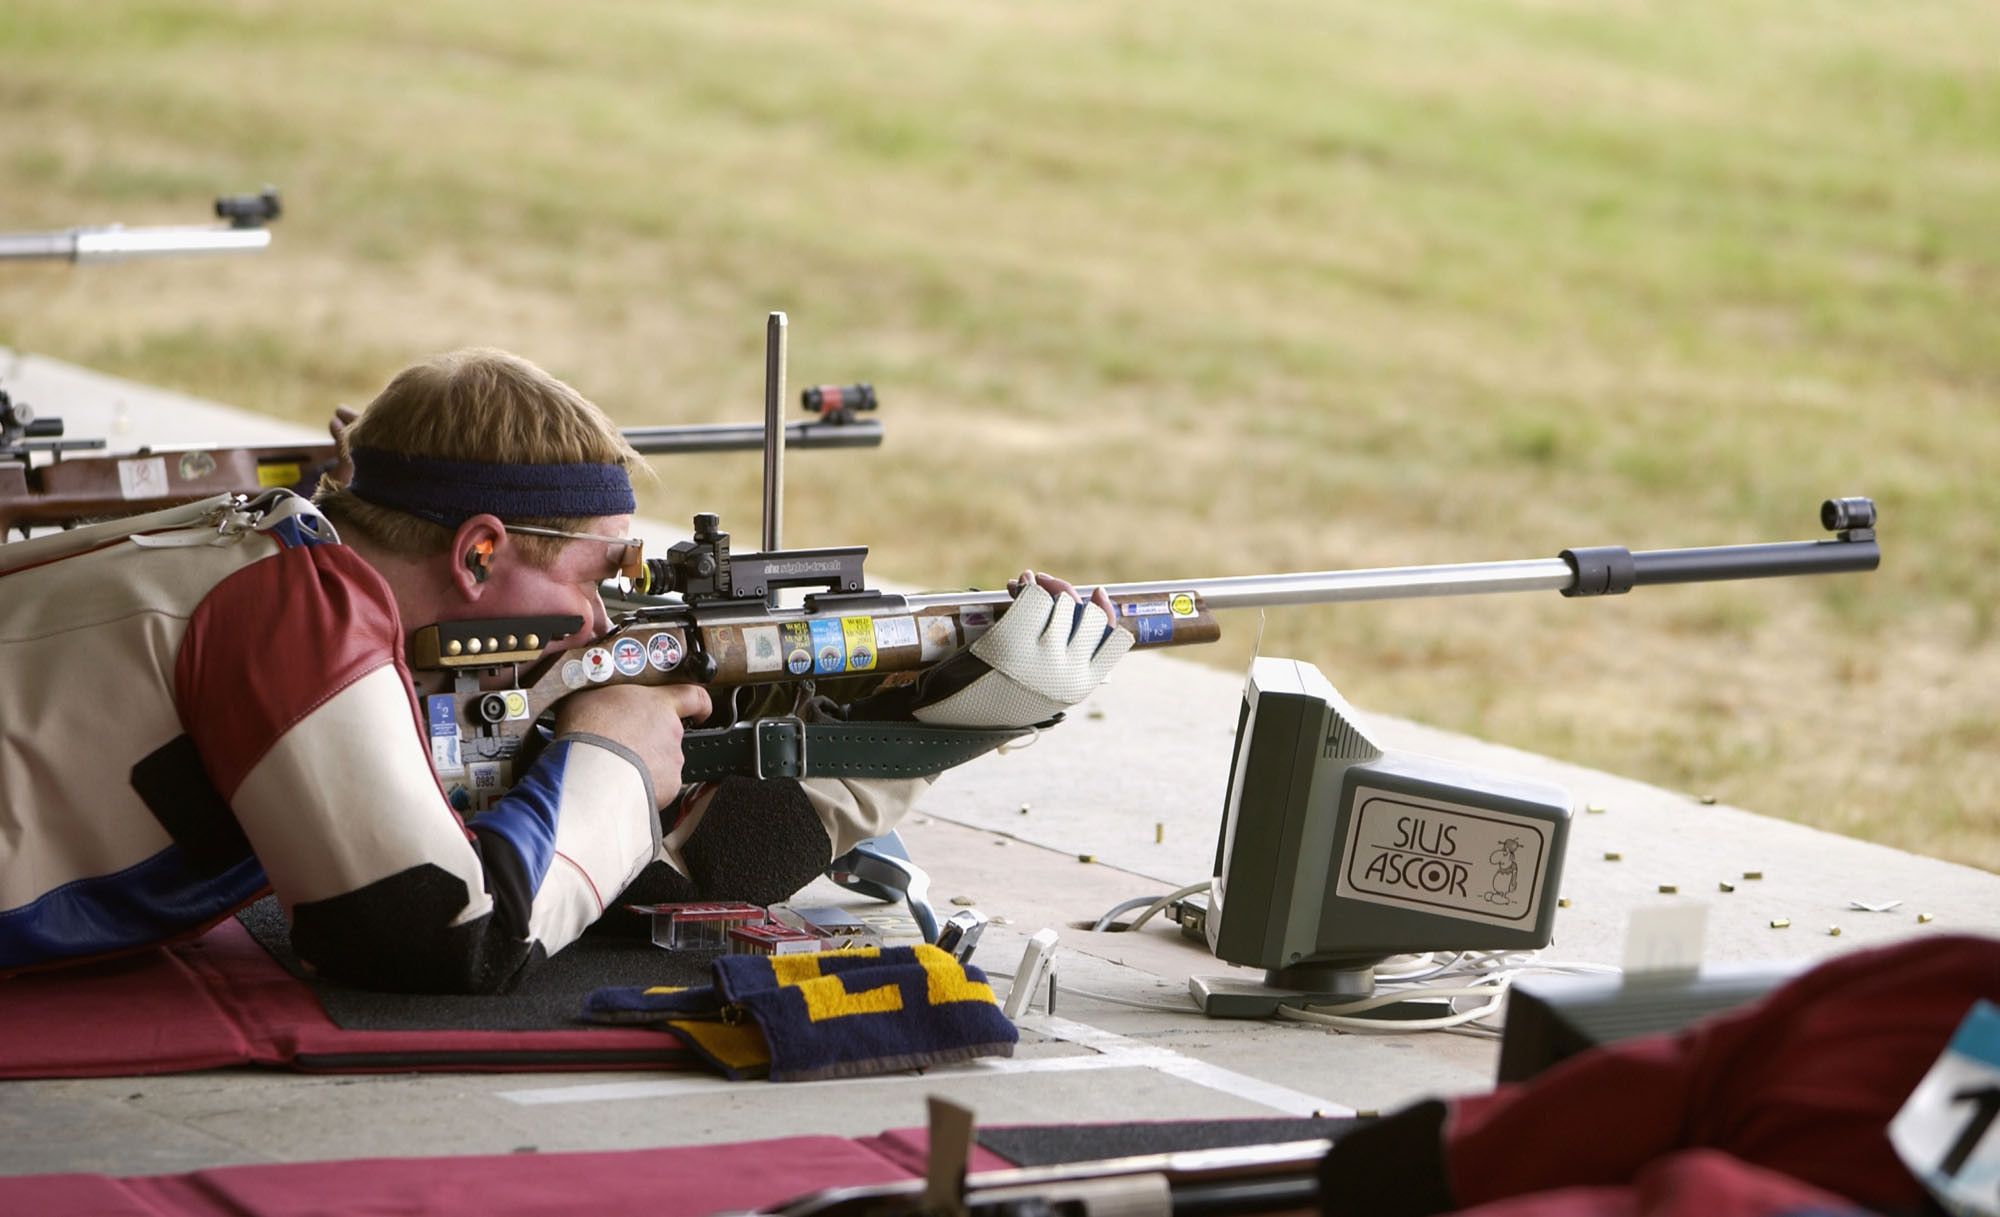 Bisley seems the most likely option if shooting is added to the programe for the 2022 Commonwealth Games ©Getty Images